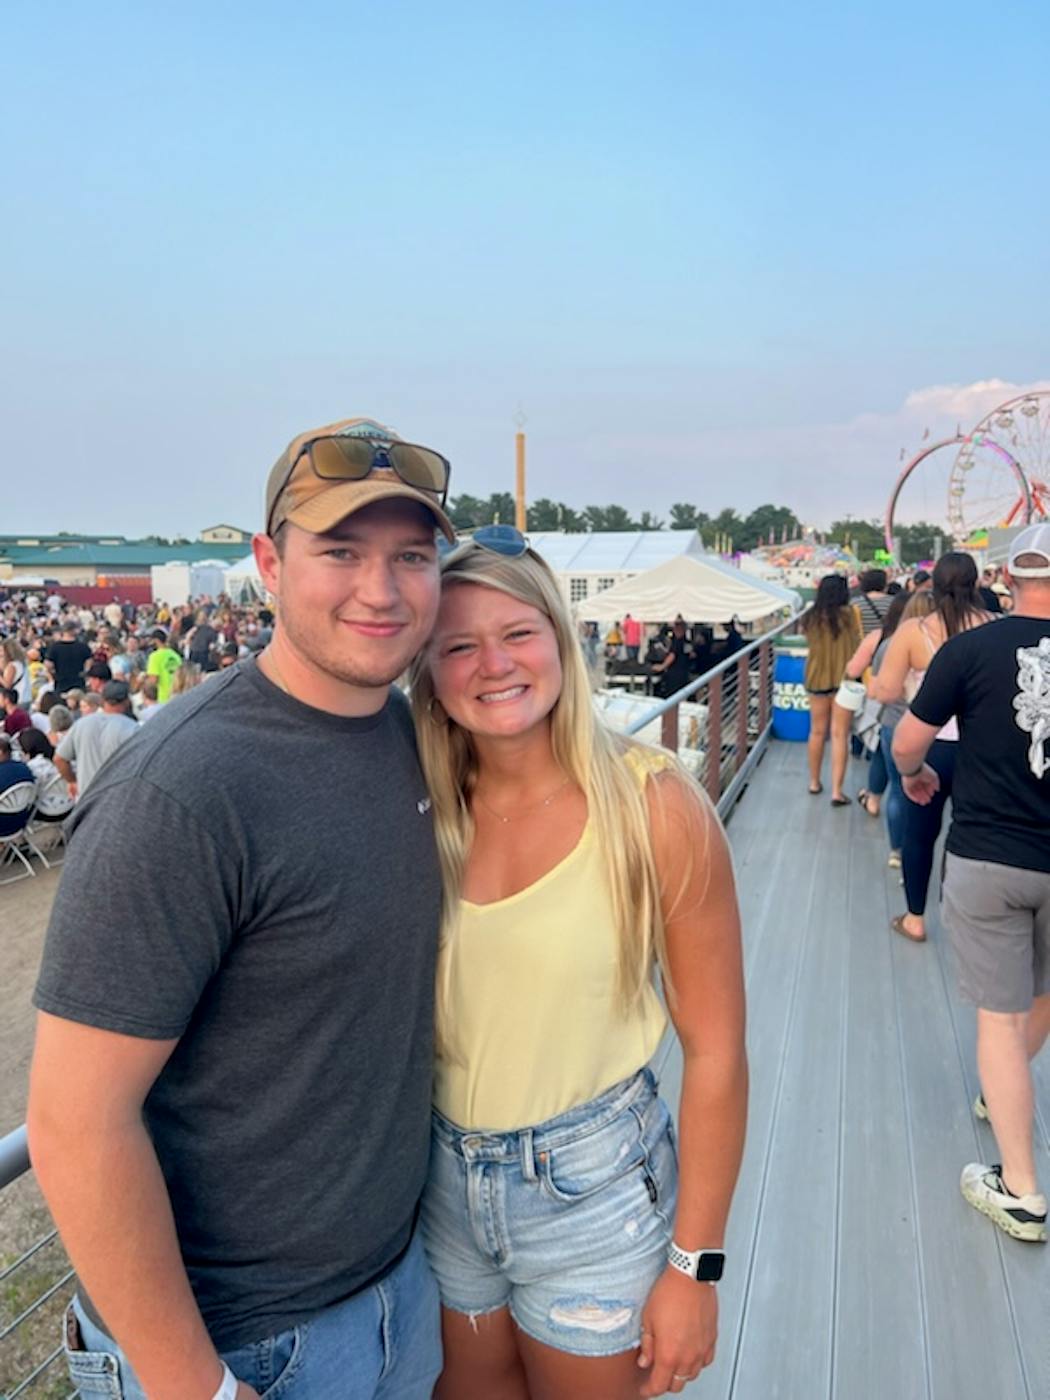 Andrew Anstoetter, left, and Anna Swanson were in the early days of their relationship when her life was upended by a car crash. His support became essential to her recovery.